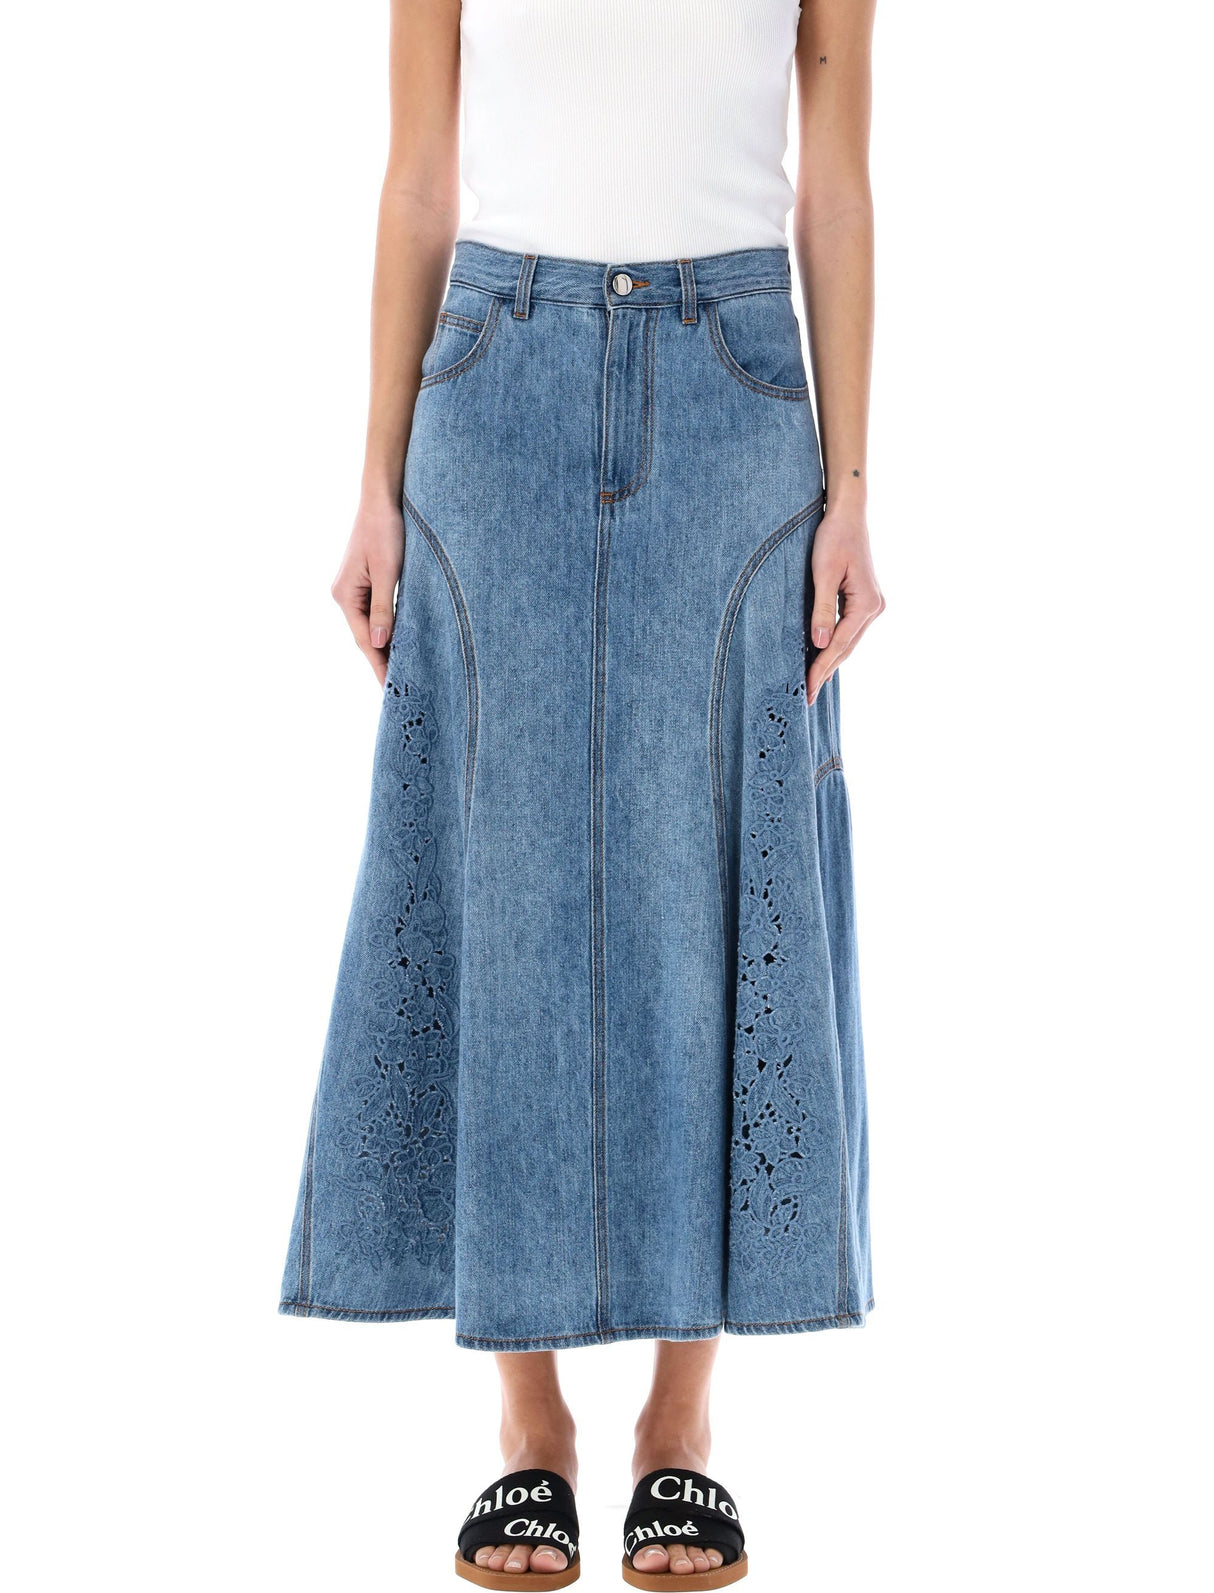 Floral Embroidered Flared Denim Midi Skirt in Blue for Women by CHLOÉ